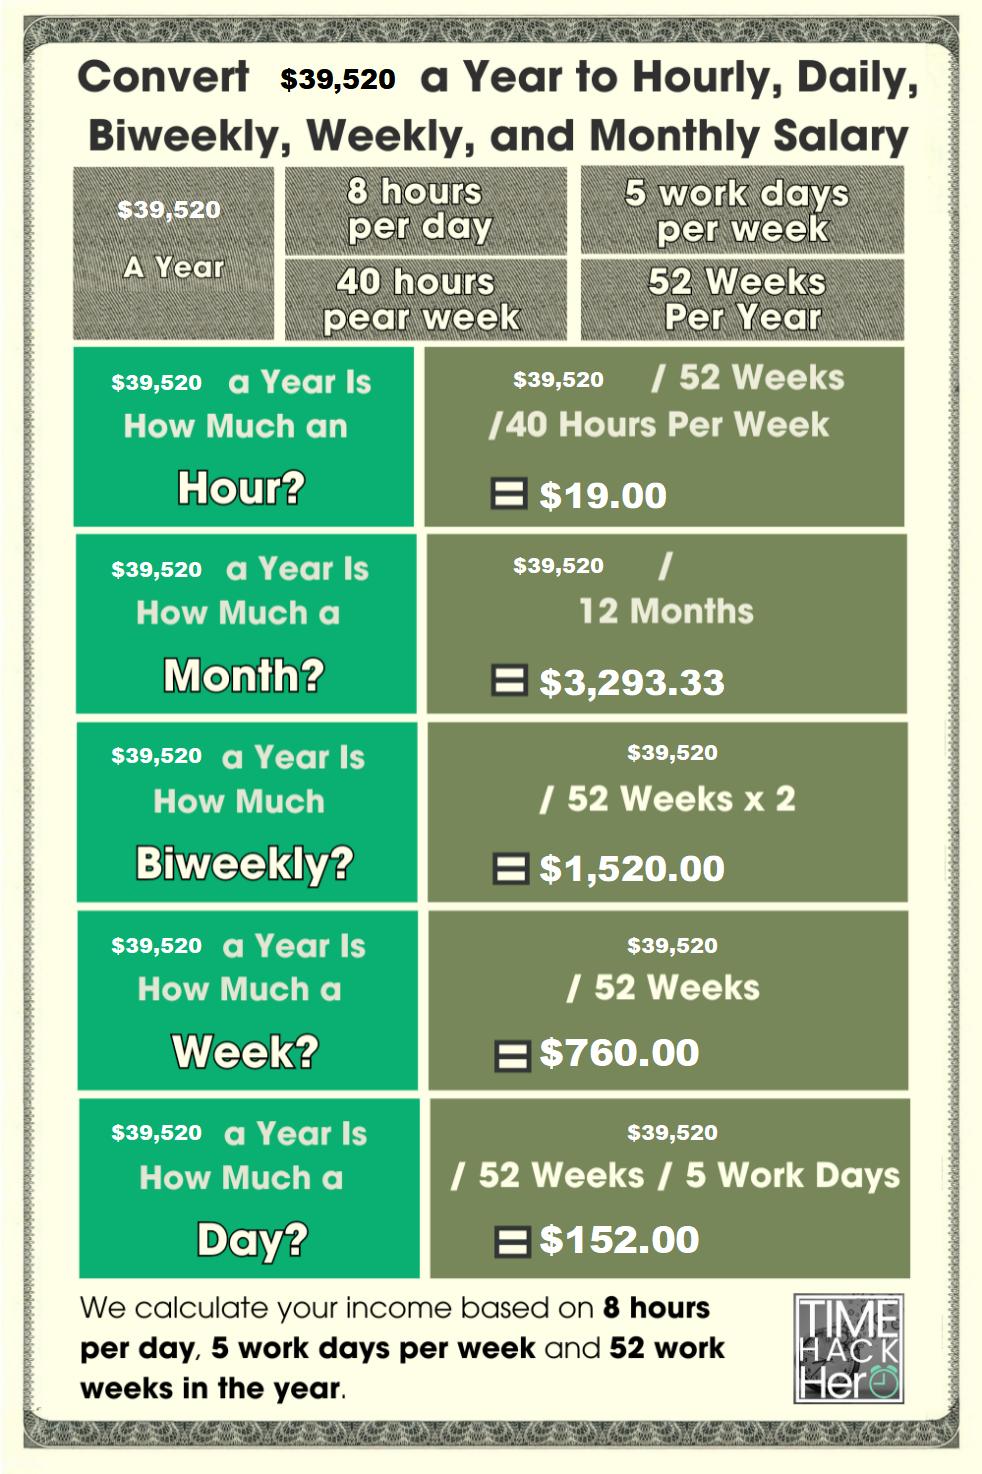 Convert $39520 a Year to Hourly, Daily, Biweekly, Weekly, and Monthly Salary